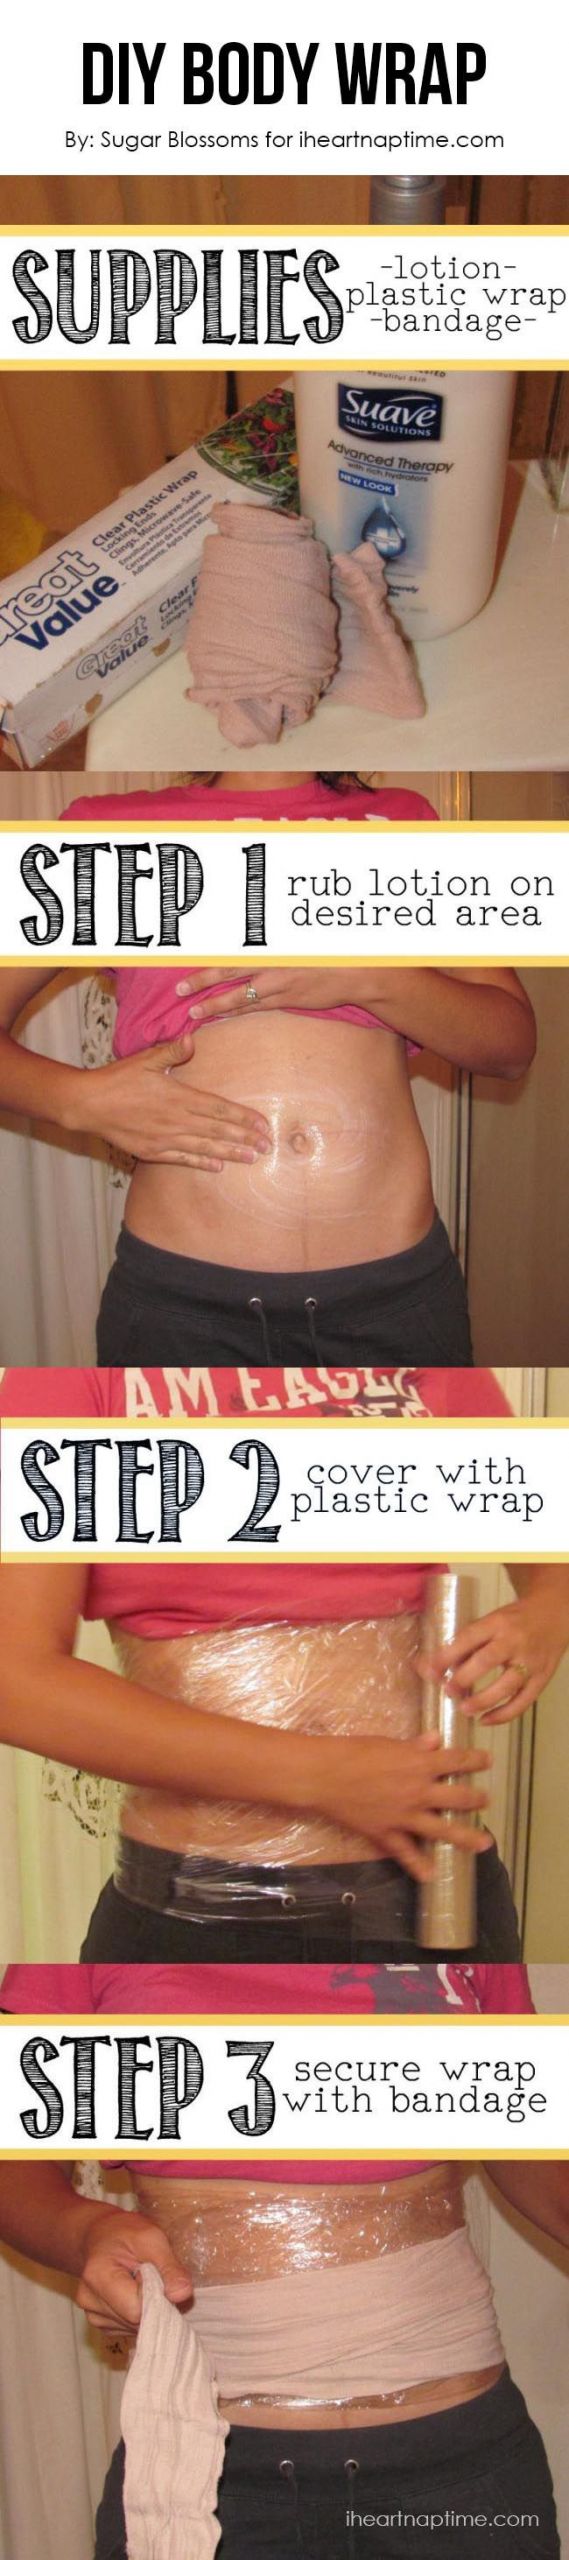 How To Lose Belly Fat Overnight Diy Body Wrap
 DIY Body Wrap Lose up to 1 inch over night The